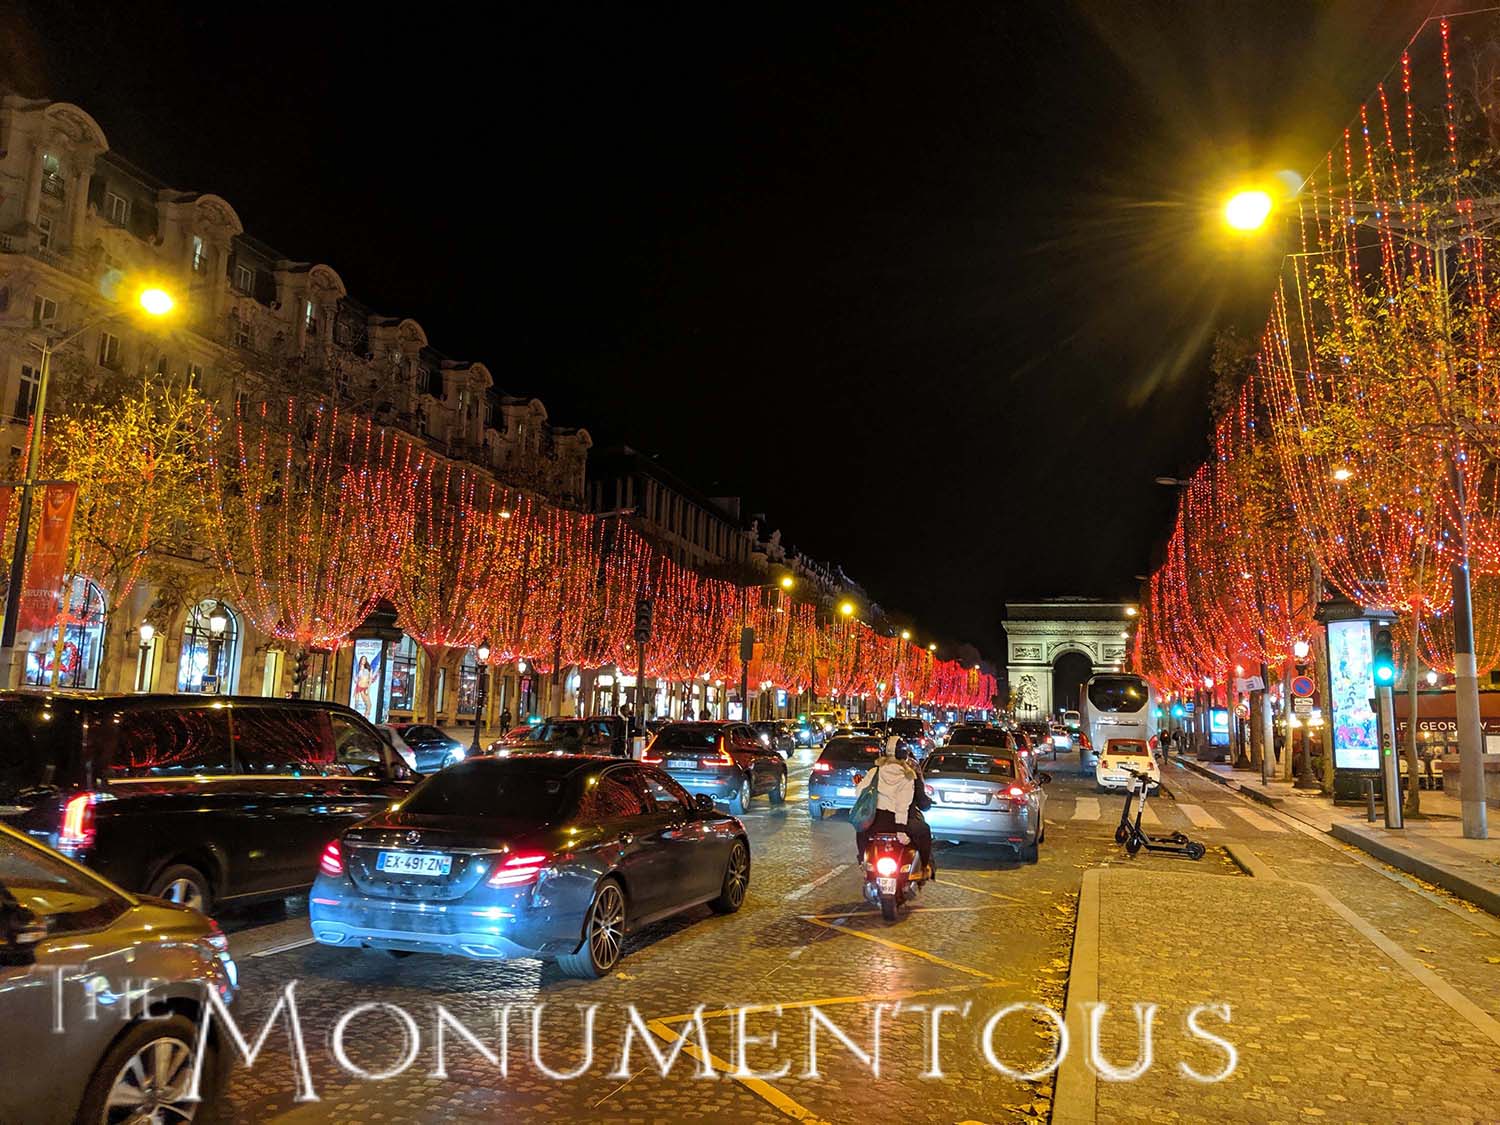 Champs Elysees, Paris: the most beautiful avenue in the world